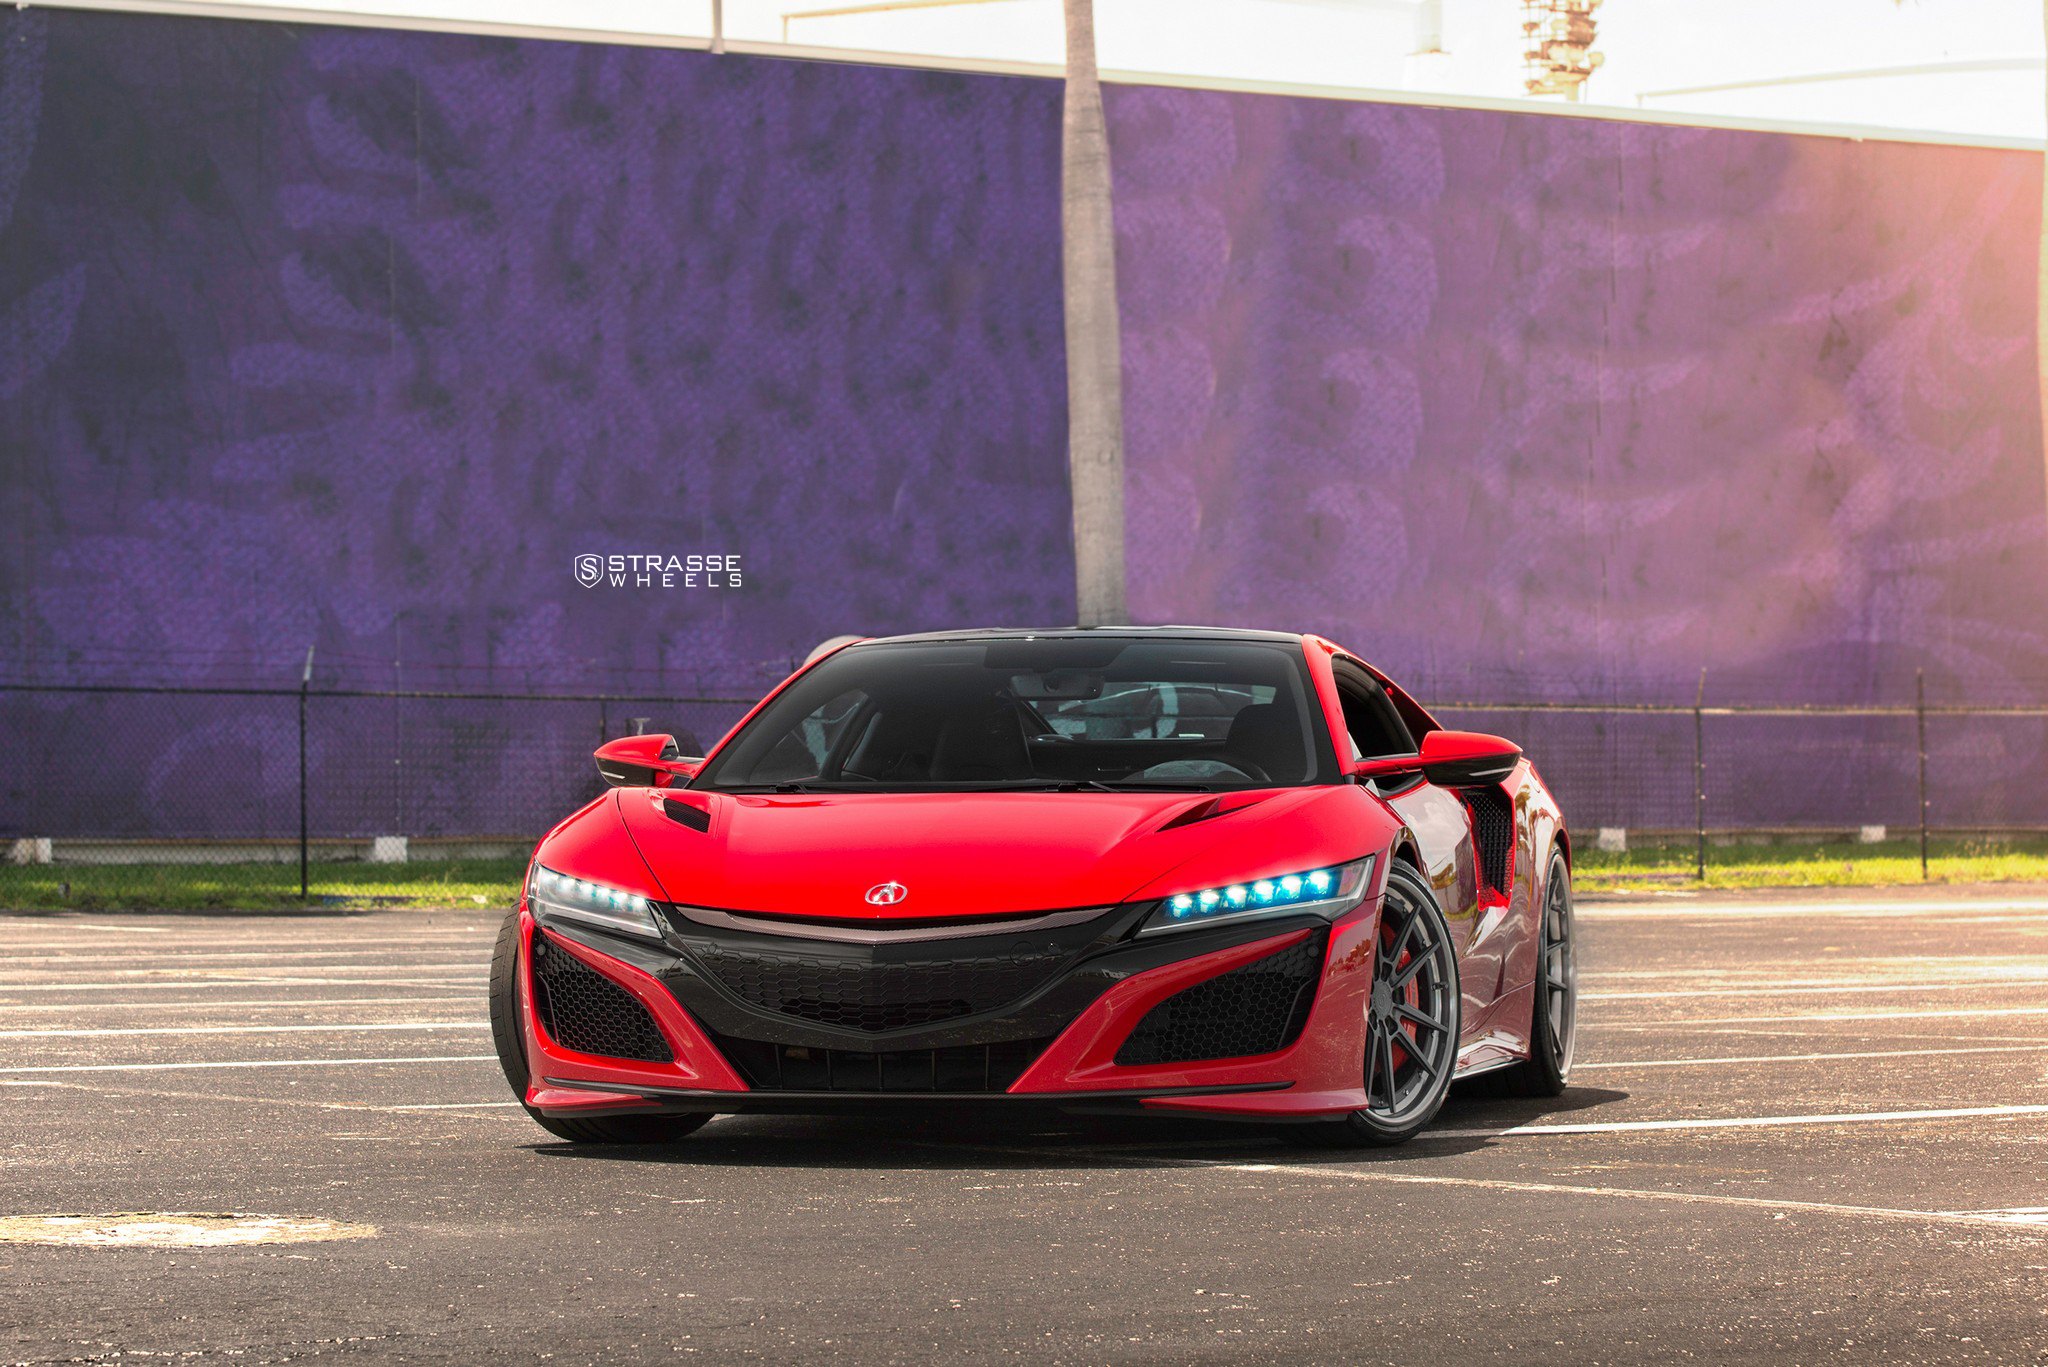 Custom Hood with Air Vents on Red Acura NSX - Photo by Strasse Wheels